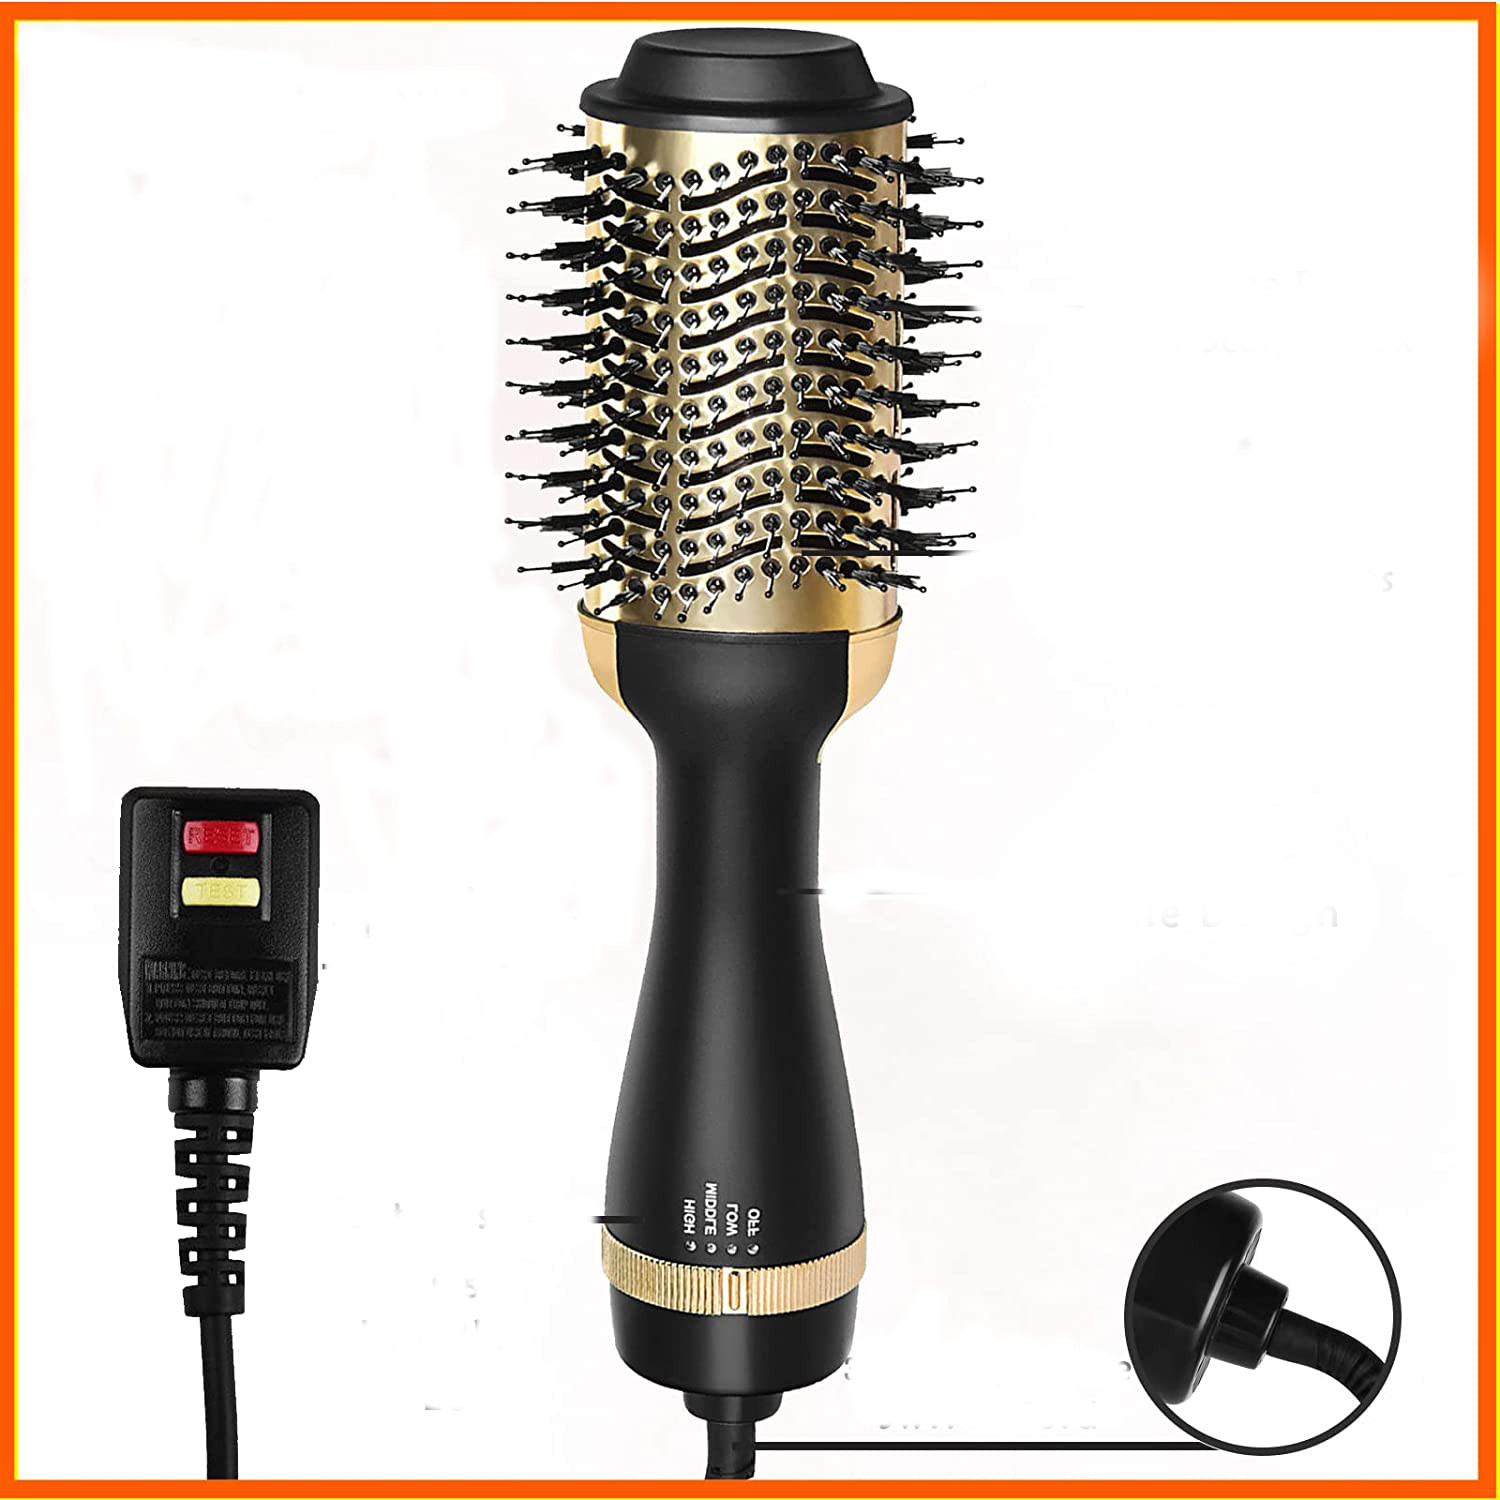 image of 4 in 1 Hot Air Brush Straightening Curling and Drying